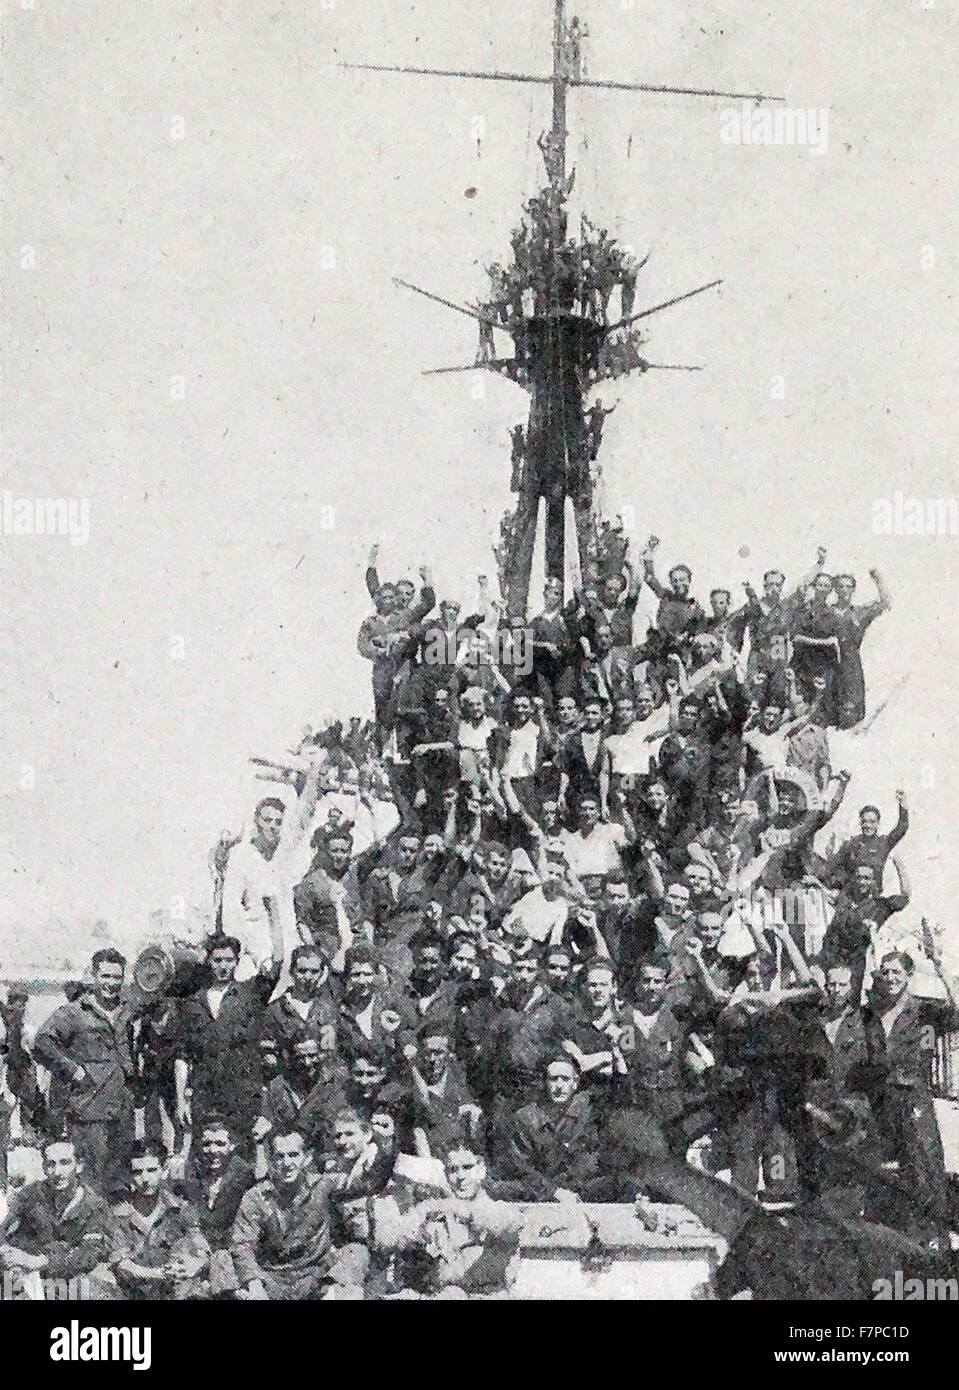 Victorious crew of the Spanish Nationalist Cruiser 'Libertad 1936. In the first months 1936 she took part of a gunnery exercise with live ammunition along with the battleship Jaime I and the Miguel de Cervantes in which they sank the target ship, the old unarmoured cruiser Conde del Venadito Stock Photo